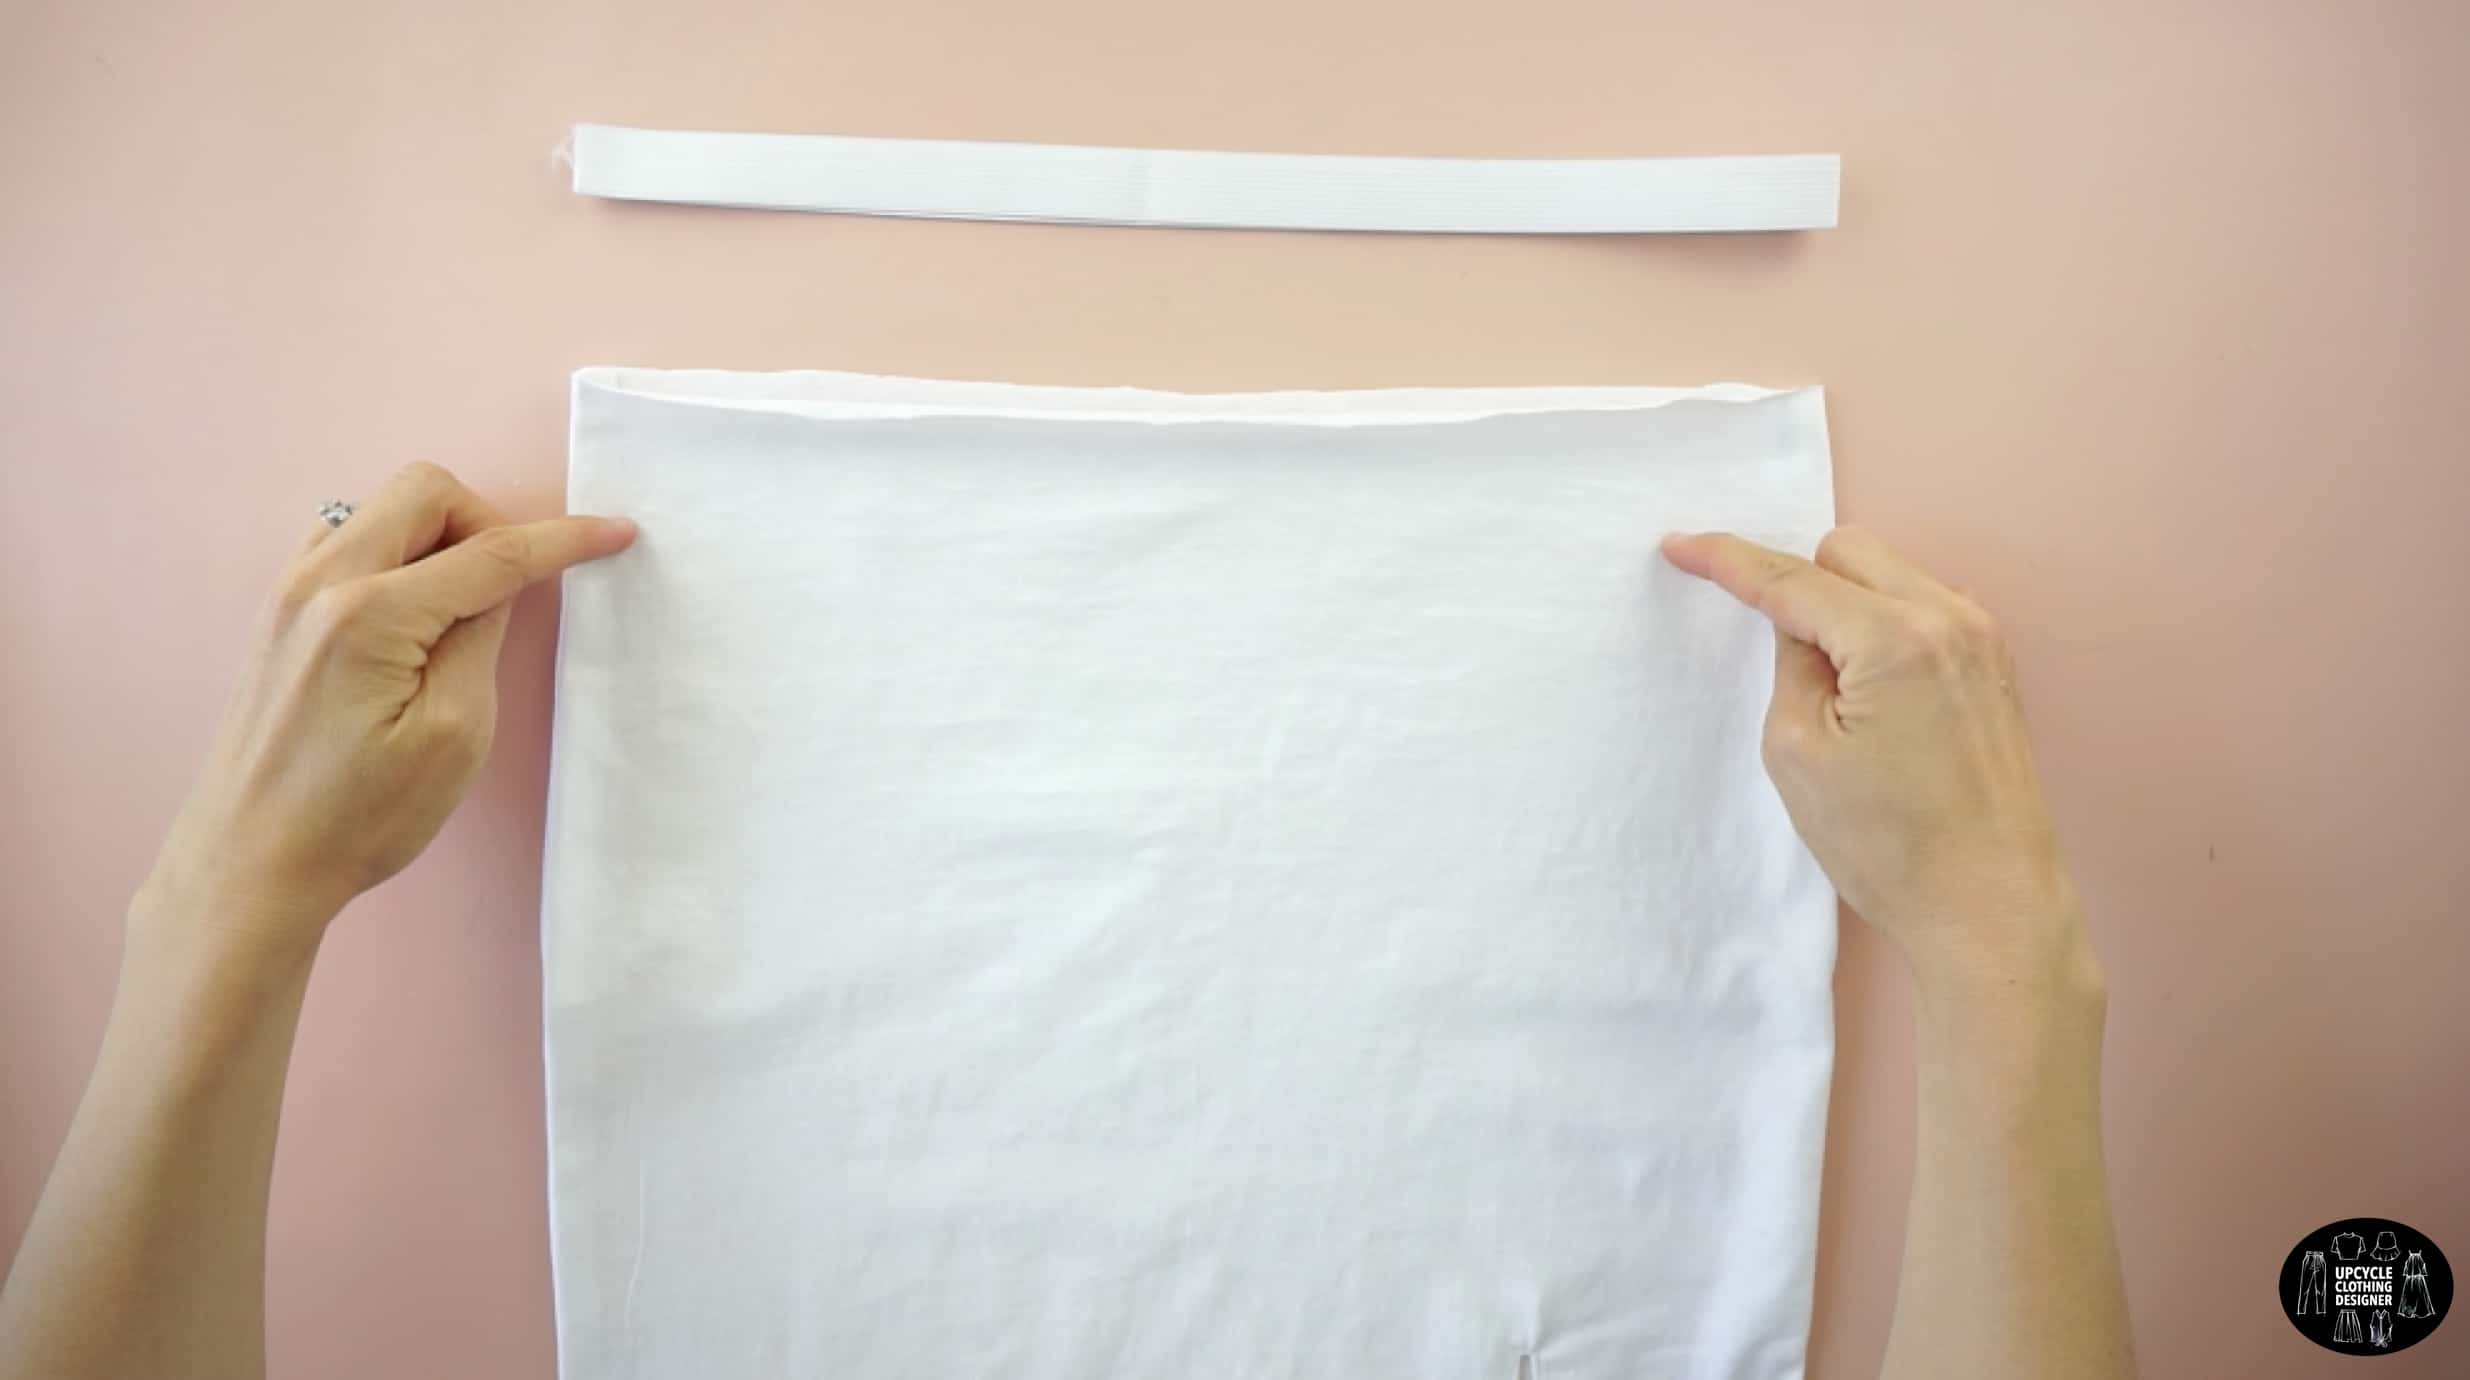 Cut a piece of ¾” elastic band that is 28” long for the waistband